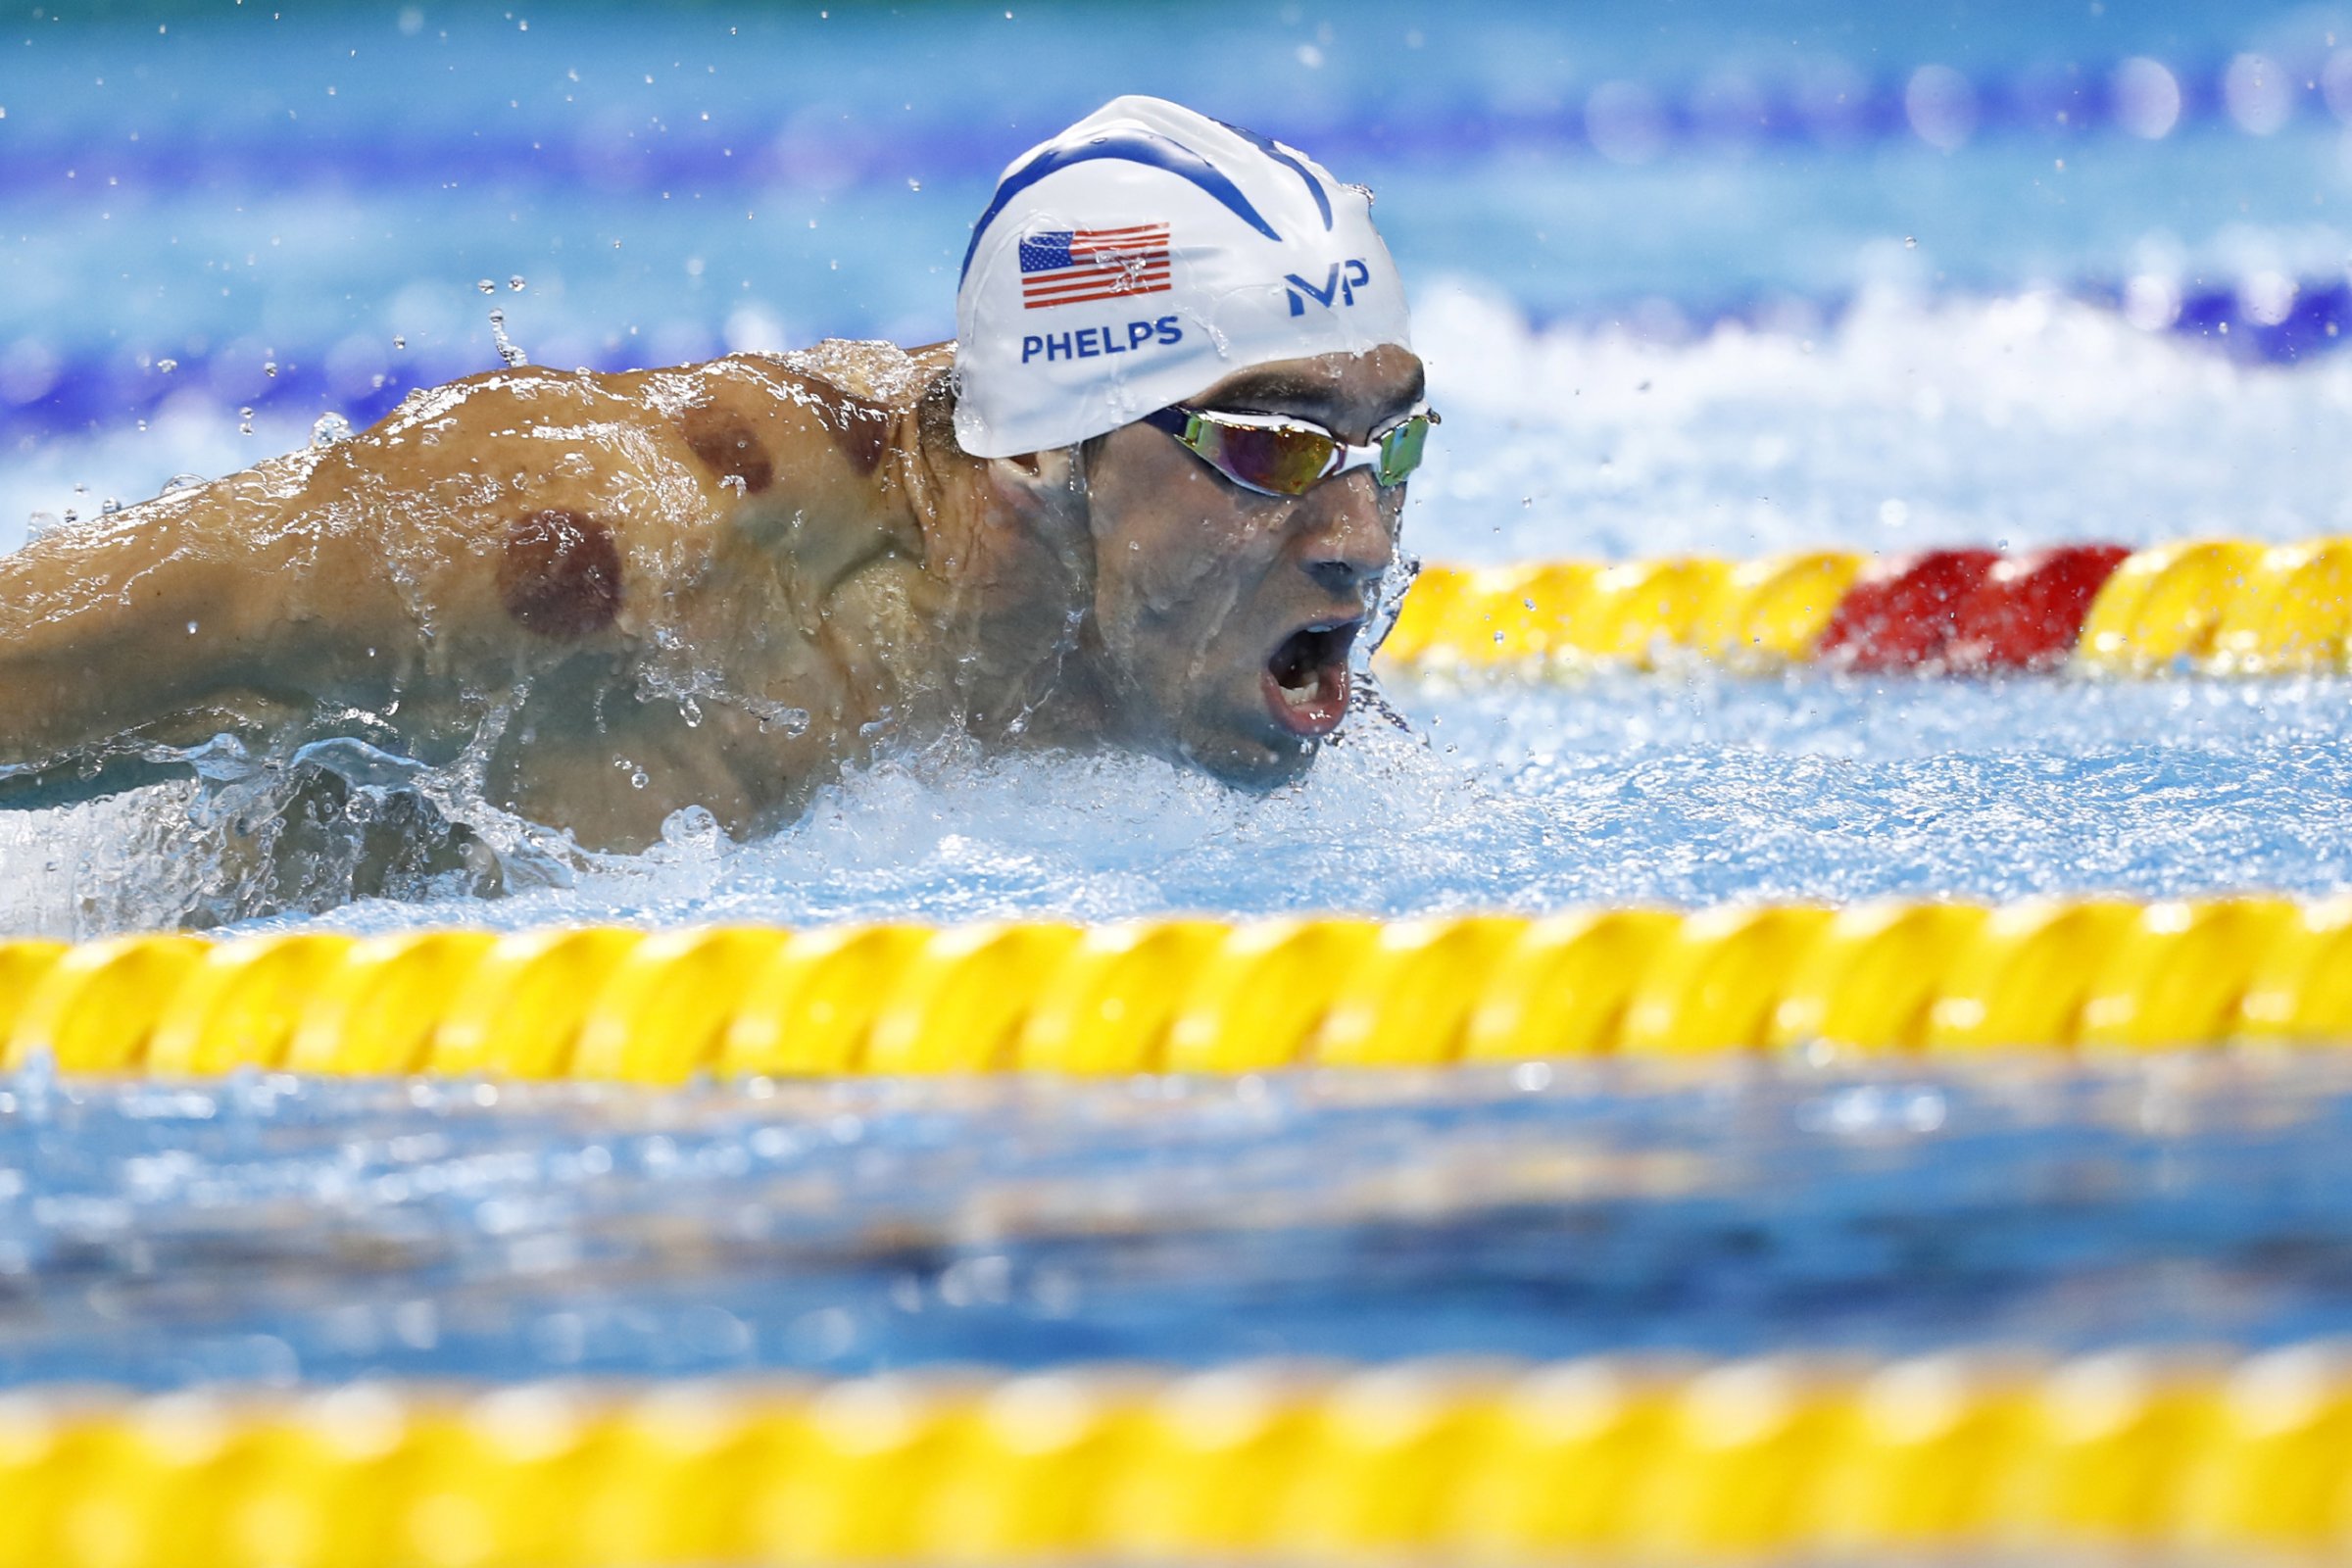 USA's Michael Phelps competes in a Men's 200m Butterfly heat during the swimming event at the Rio 2016 Olympic Games at the Olympic Aquatics Stadium in Rio de Janeiro on August 8, 2016. / AFP / Odd Andersen (Photo credit should read ODD ANDERSEN/AFP/Getty Images)